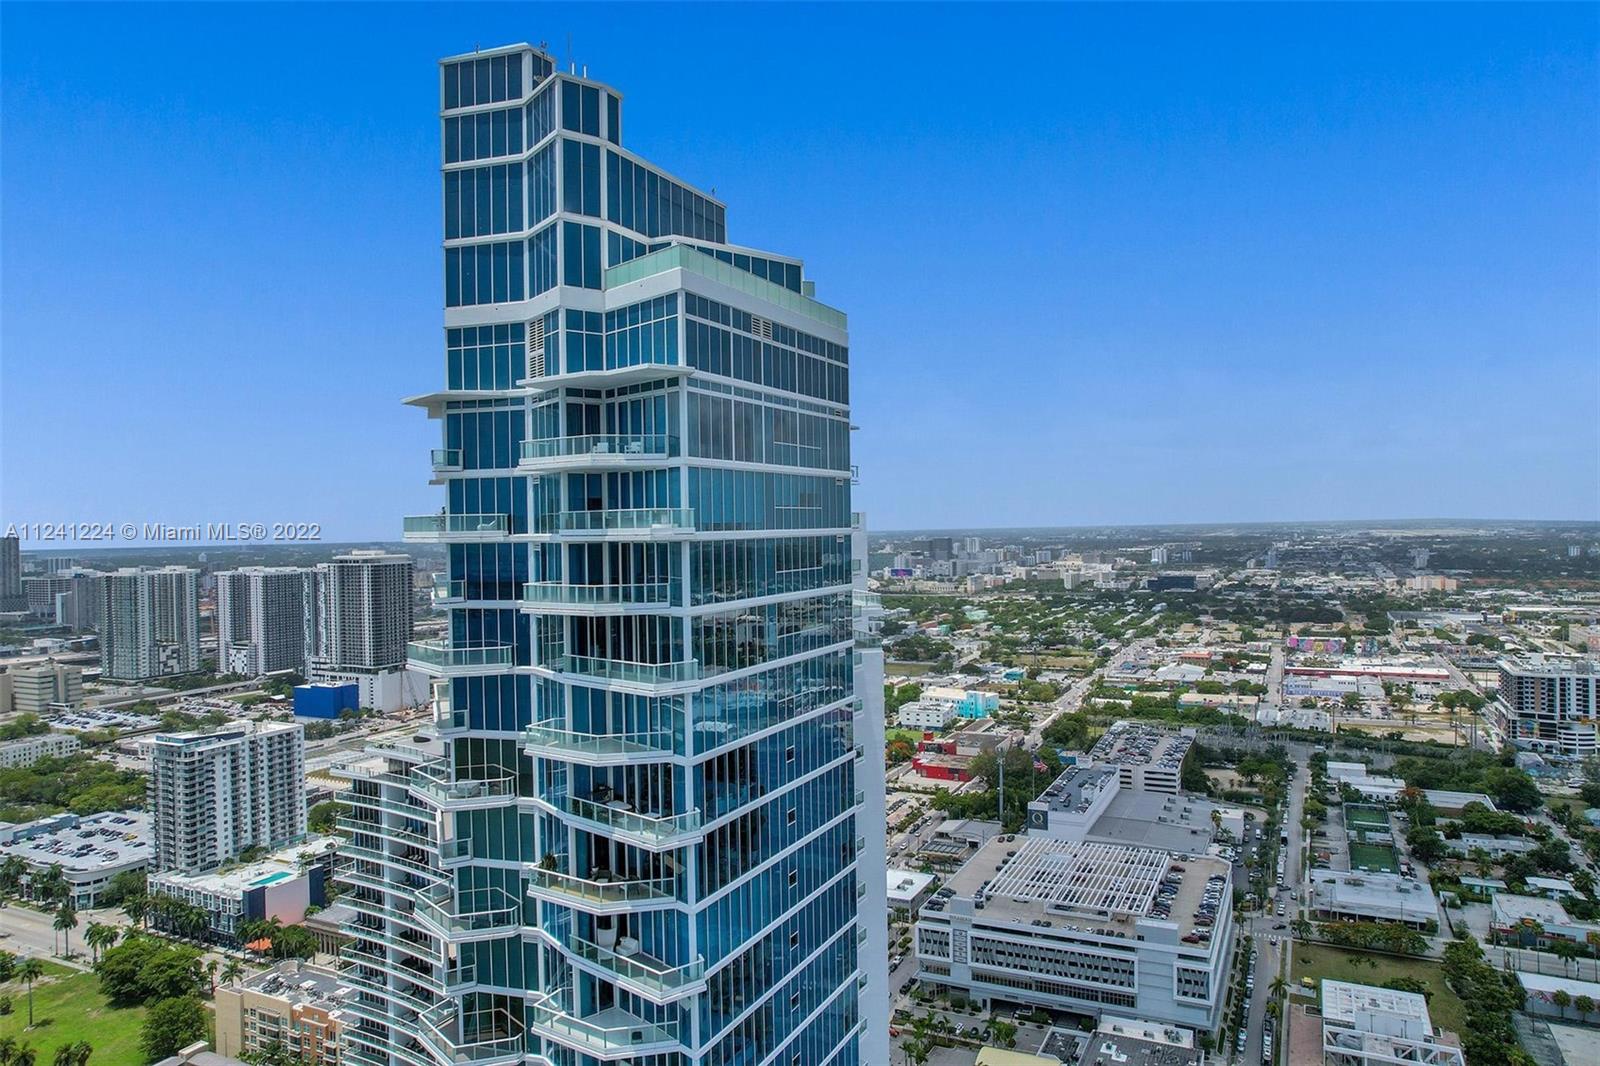 SPECTACULARLY & THOUGHTFULLY DESIGNED, UNIQUE HGTV URBAN OASIS WINNING UNIT. FULLY FURNISHED 2BD/2.5BA CORNER UNIT AT LUXURIOUS PARAMOUNT BAY! THIS BRIGHT AND RARELY AVAILABLE 01 LINE UNIT FEATURES 10 FT HIGH- FLOOR TO CEILING WINDOWS WITH COMPLETELY UNOBSTRUCTED 180 DEGREE VIEWS OF BISCAYNE BAY AND THE MIAMI SKYLINE. ENJOY YOUR PRIVACY WITH PRIVATE ELEVATOR, OPEN KITCHEN, BUILT IN WINE COOLER, & A LAUNDRY ROOM. AMENITIES INCLUDE A ROOM SERVICE MENU, CONCIERGE, 24HR FRONT DESK, SUNRISE AND SUNSET POOLS WITH CABANA, WATER-VIEW GYM, PILATES , SPA, VALET PARKING, GAME ROOM AND A WATERFRONT BANQUET ROOM. CENTRALLY LOCATED CLOSE TO ARSHT CENTER , MARGARET PACE PARK,  MARINA, PUBLIX, MIAMI DESIGN DISTRICT, WYNWOOD, BRICKELL, SOBE AND MIAMI AIRPORT. THE UNIT IS SPARKLING CLEAN & FRESHLY PAINTED.